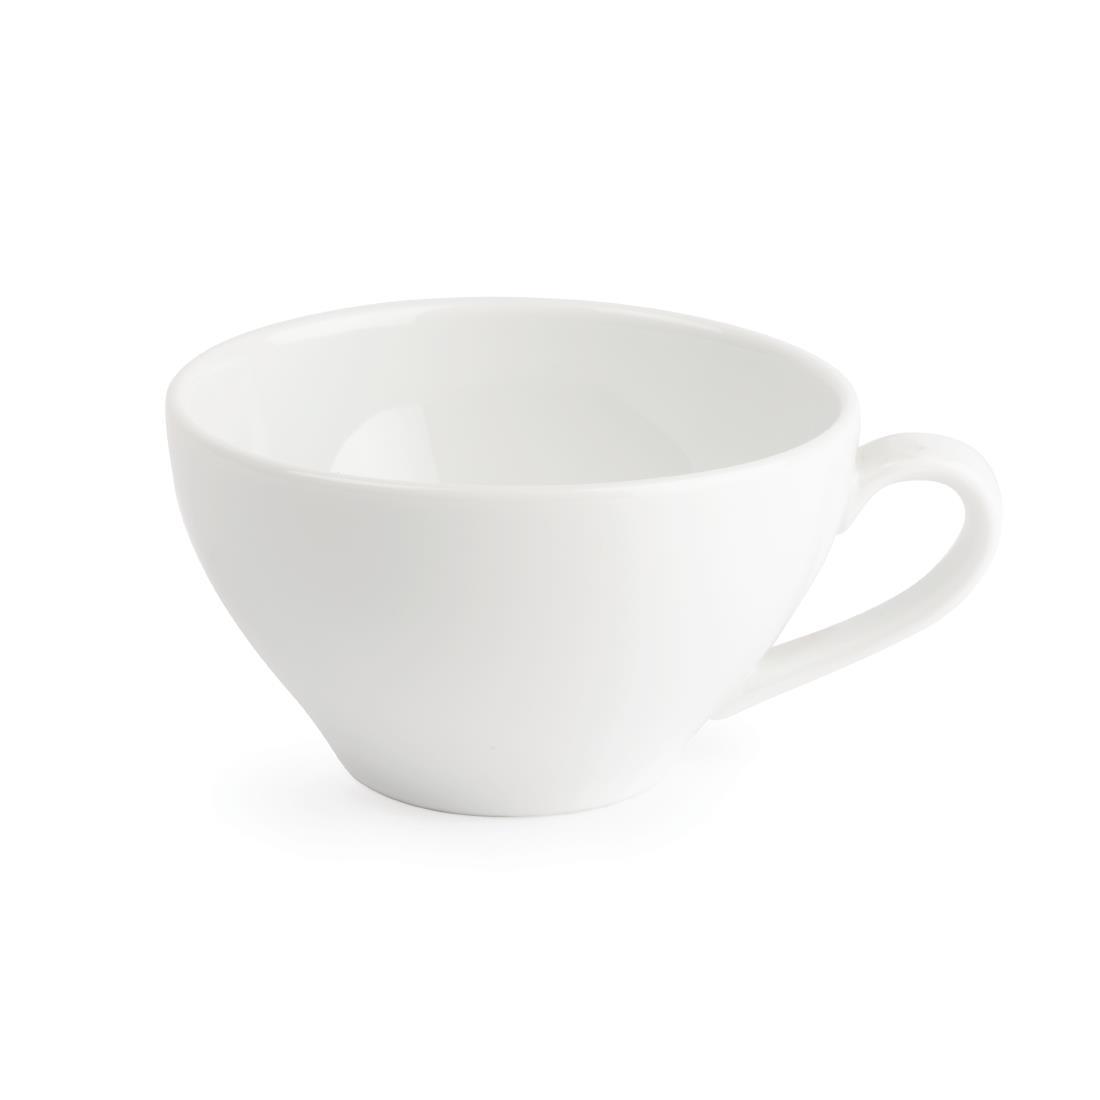 Royal Porcelain Classic White Tea Cups 230ml (Pack of 12) - CG028  - 2